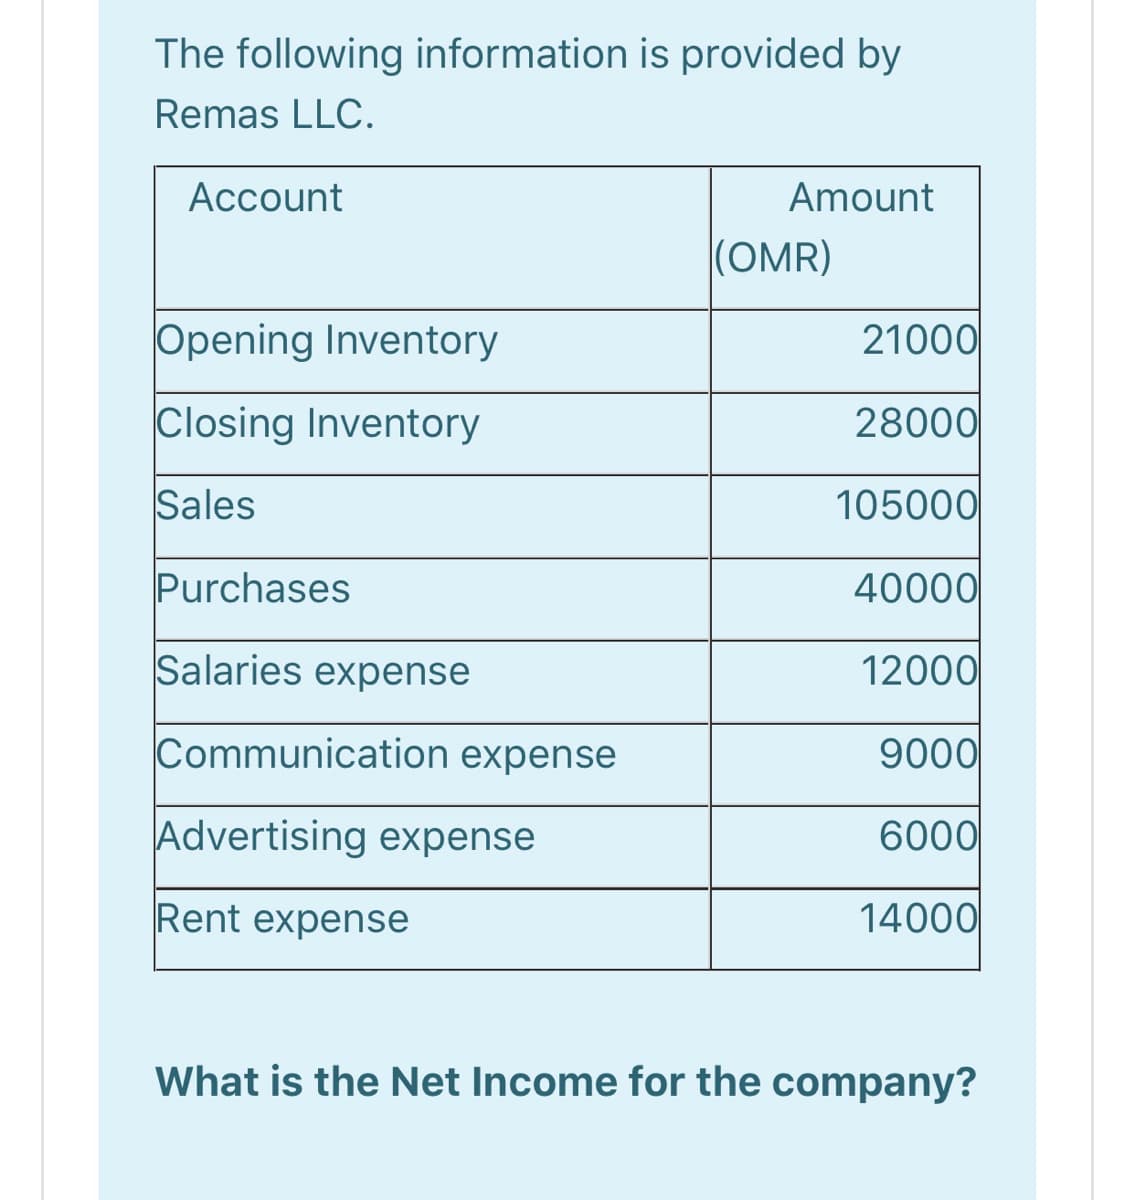 The following information is provided by
Remas LLC.
Account
Amount
|(OMR)
Opening Inventory
21000
Closing Inventory
28000
Sales
105000
Purchases
40000
Salaries expense
12000
Communication expense
9000
Advertising expense
6000
Rent expense
14000
What is the Net Income for the company?
